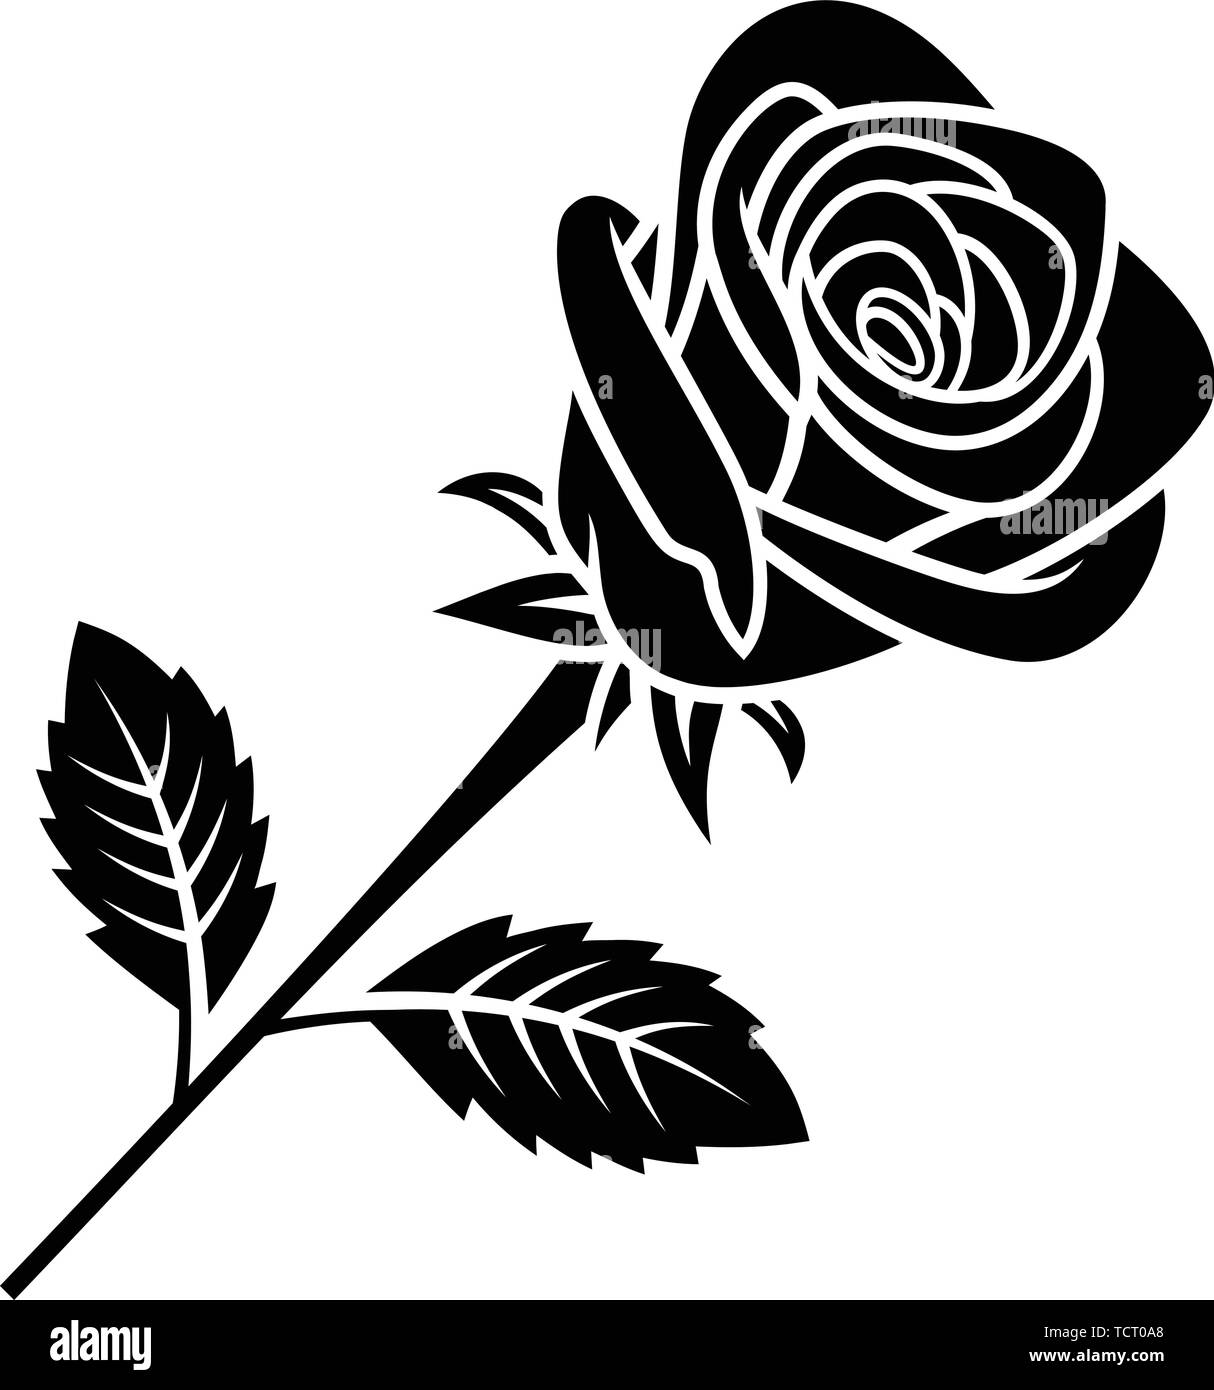 Rose silhouette isolated on white background. Use for fabric design ...